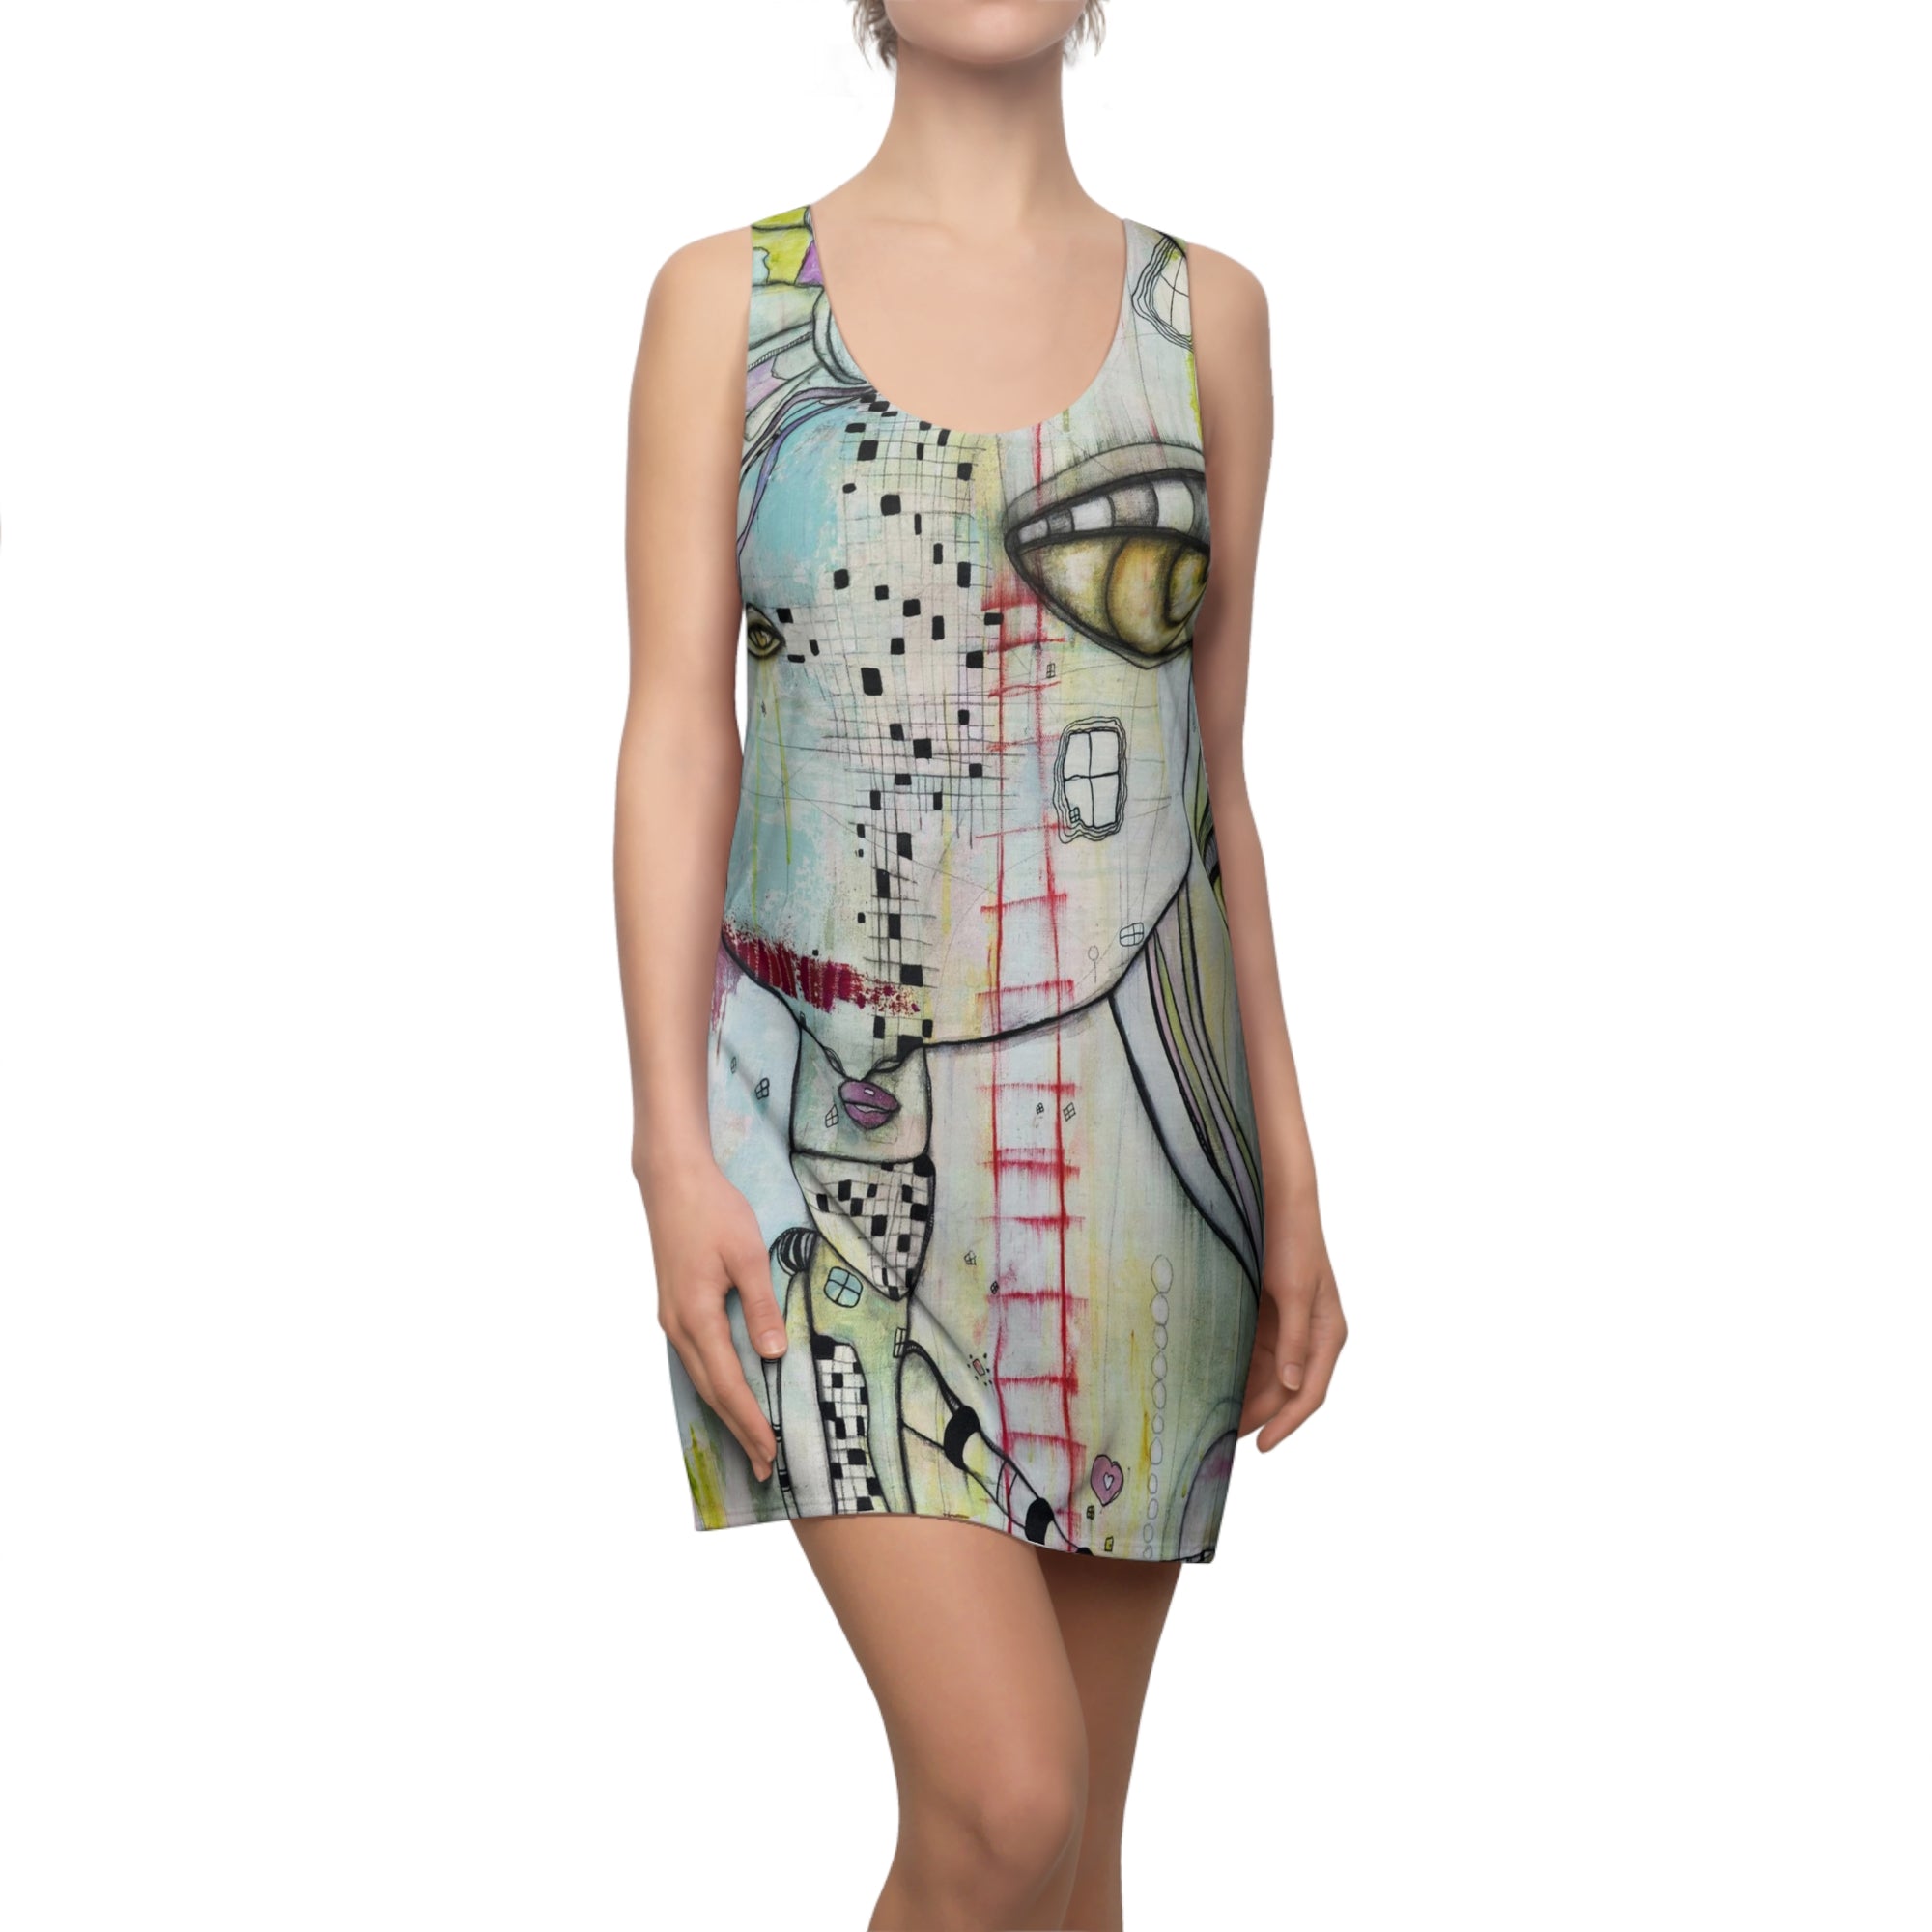 "Almost Together" Colorful Maximalist Mini Racerback Dress Original Abstract Art Fashion